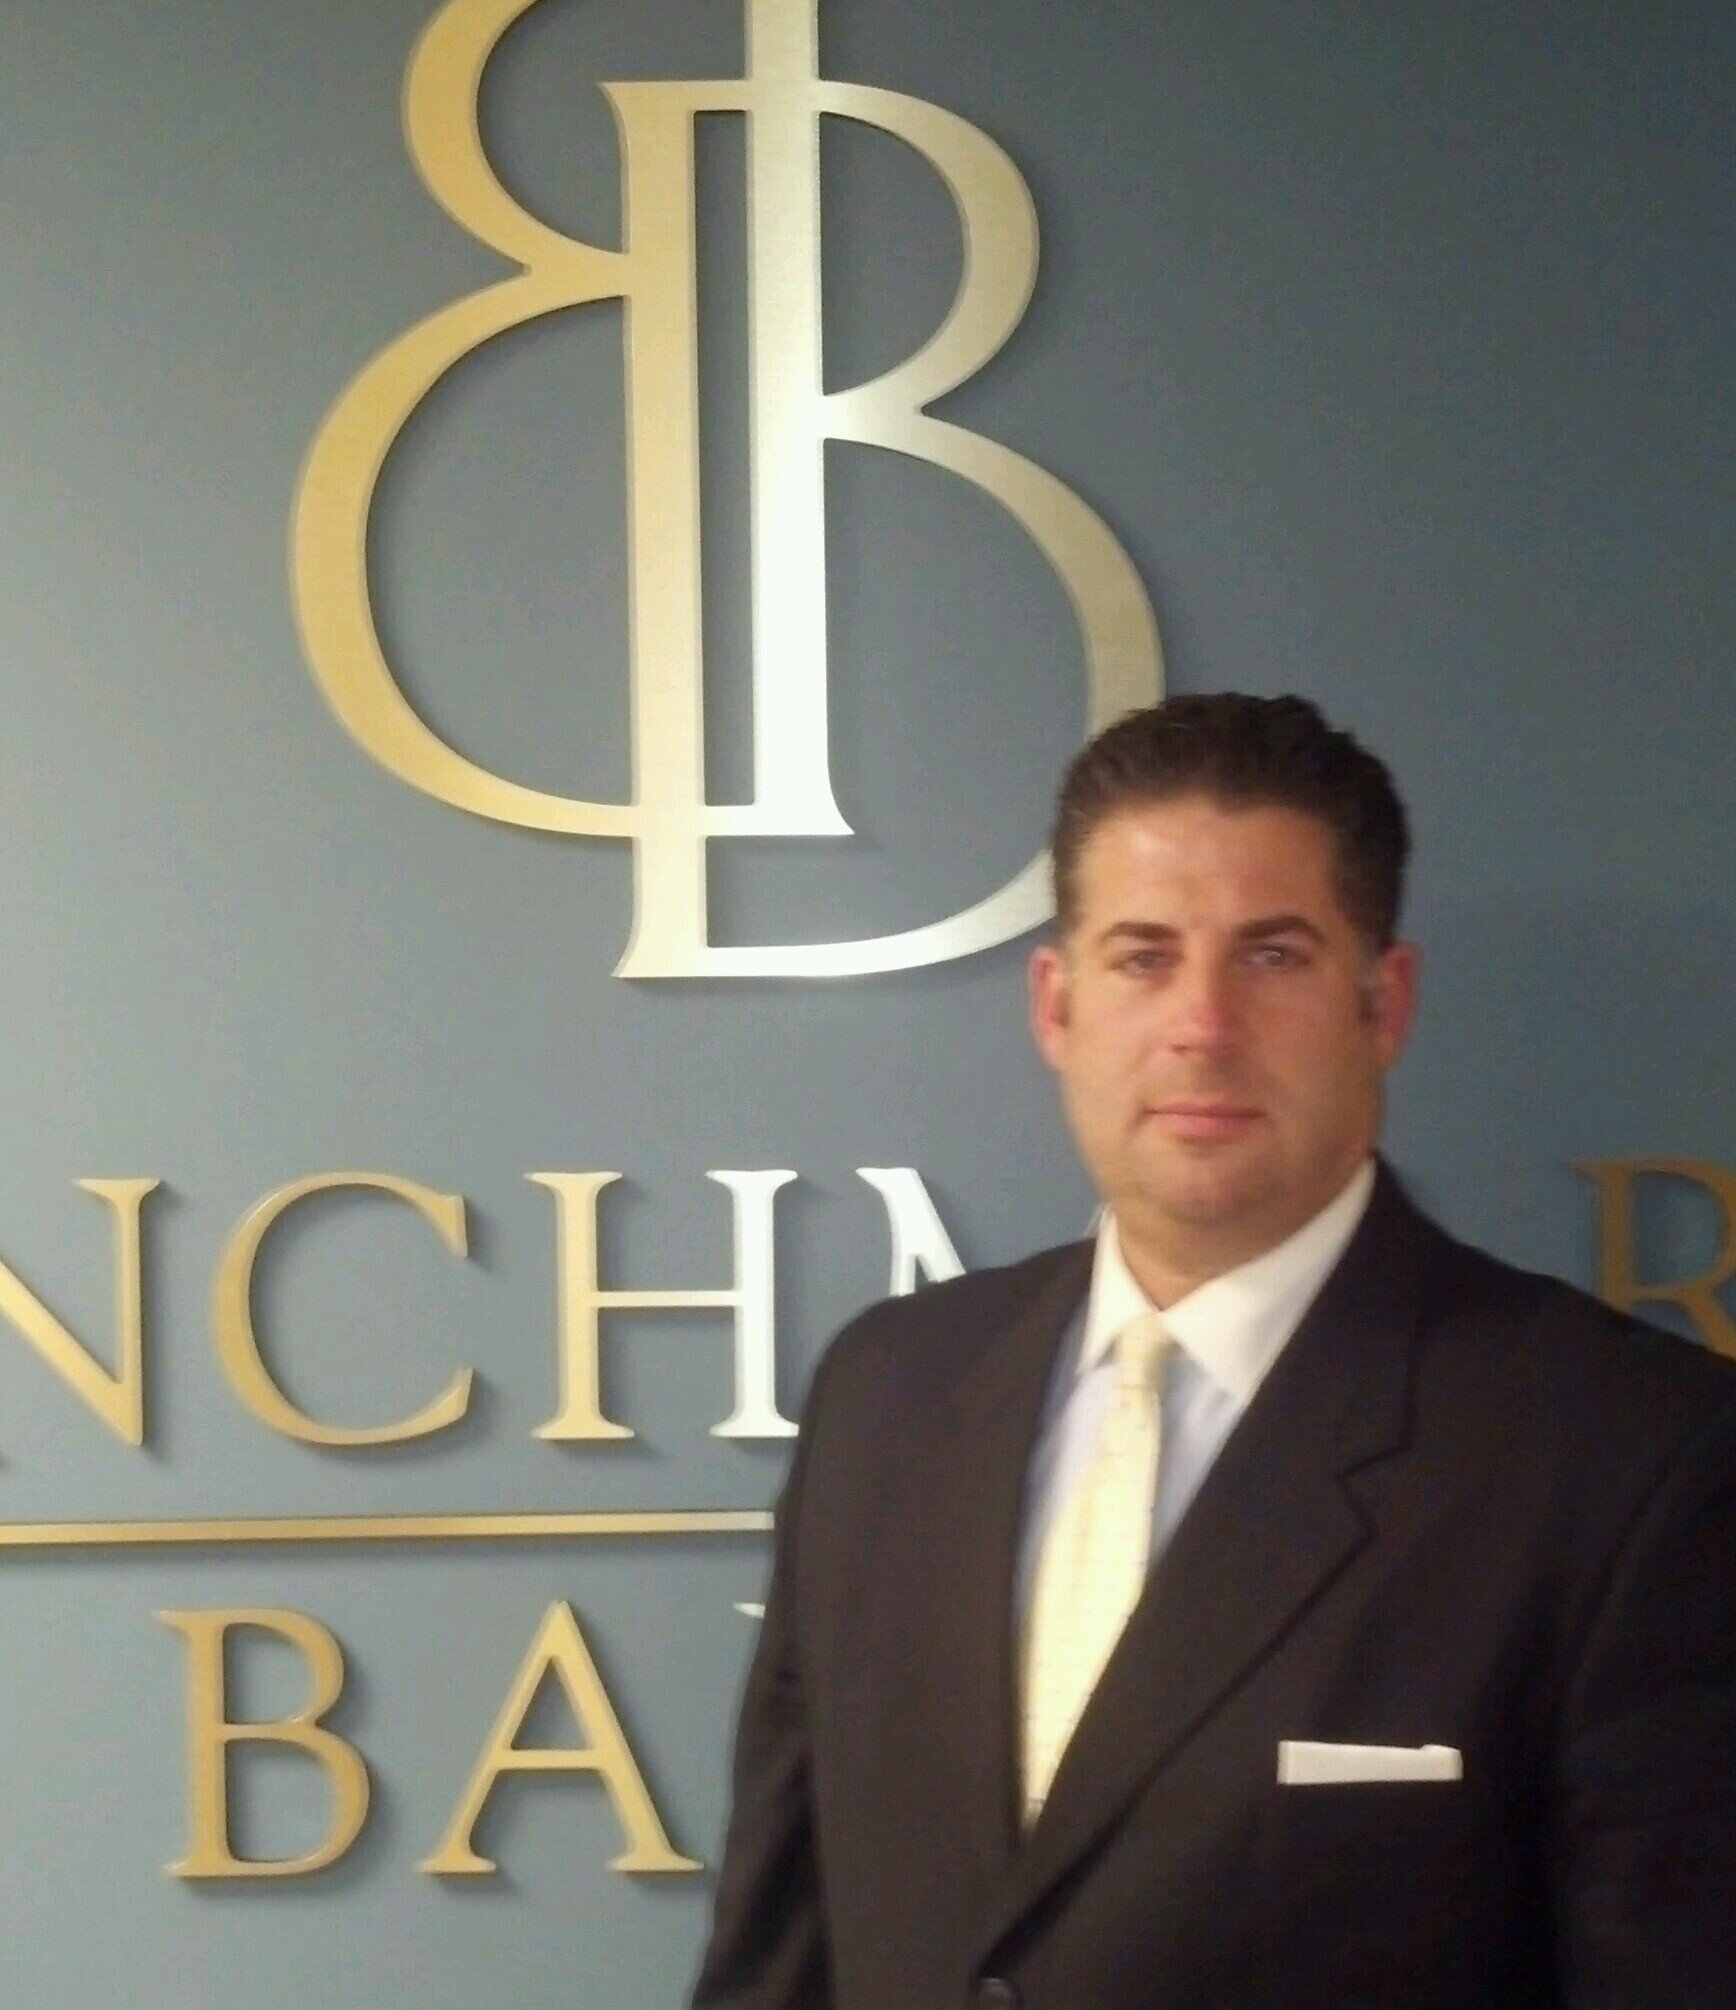 Kemper Ansel - Mortgage Lender with Benchmark Bank in Columbus, Ohio. We are THE bank for purchase transactions.